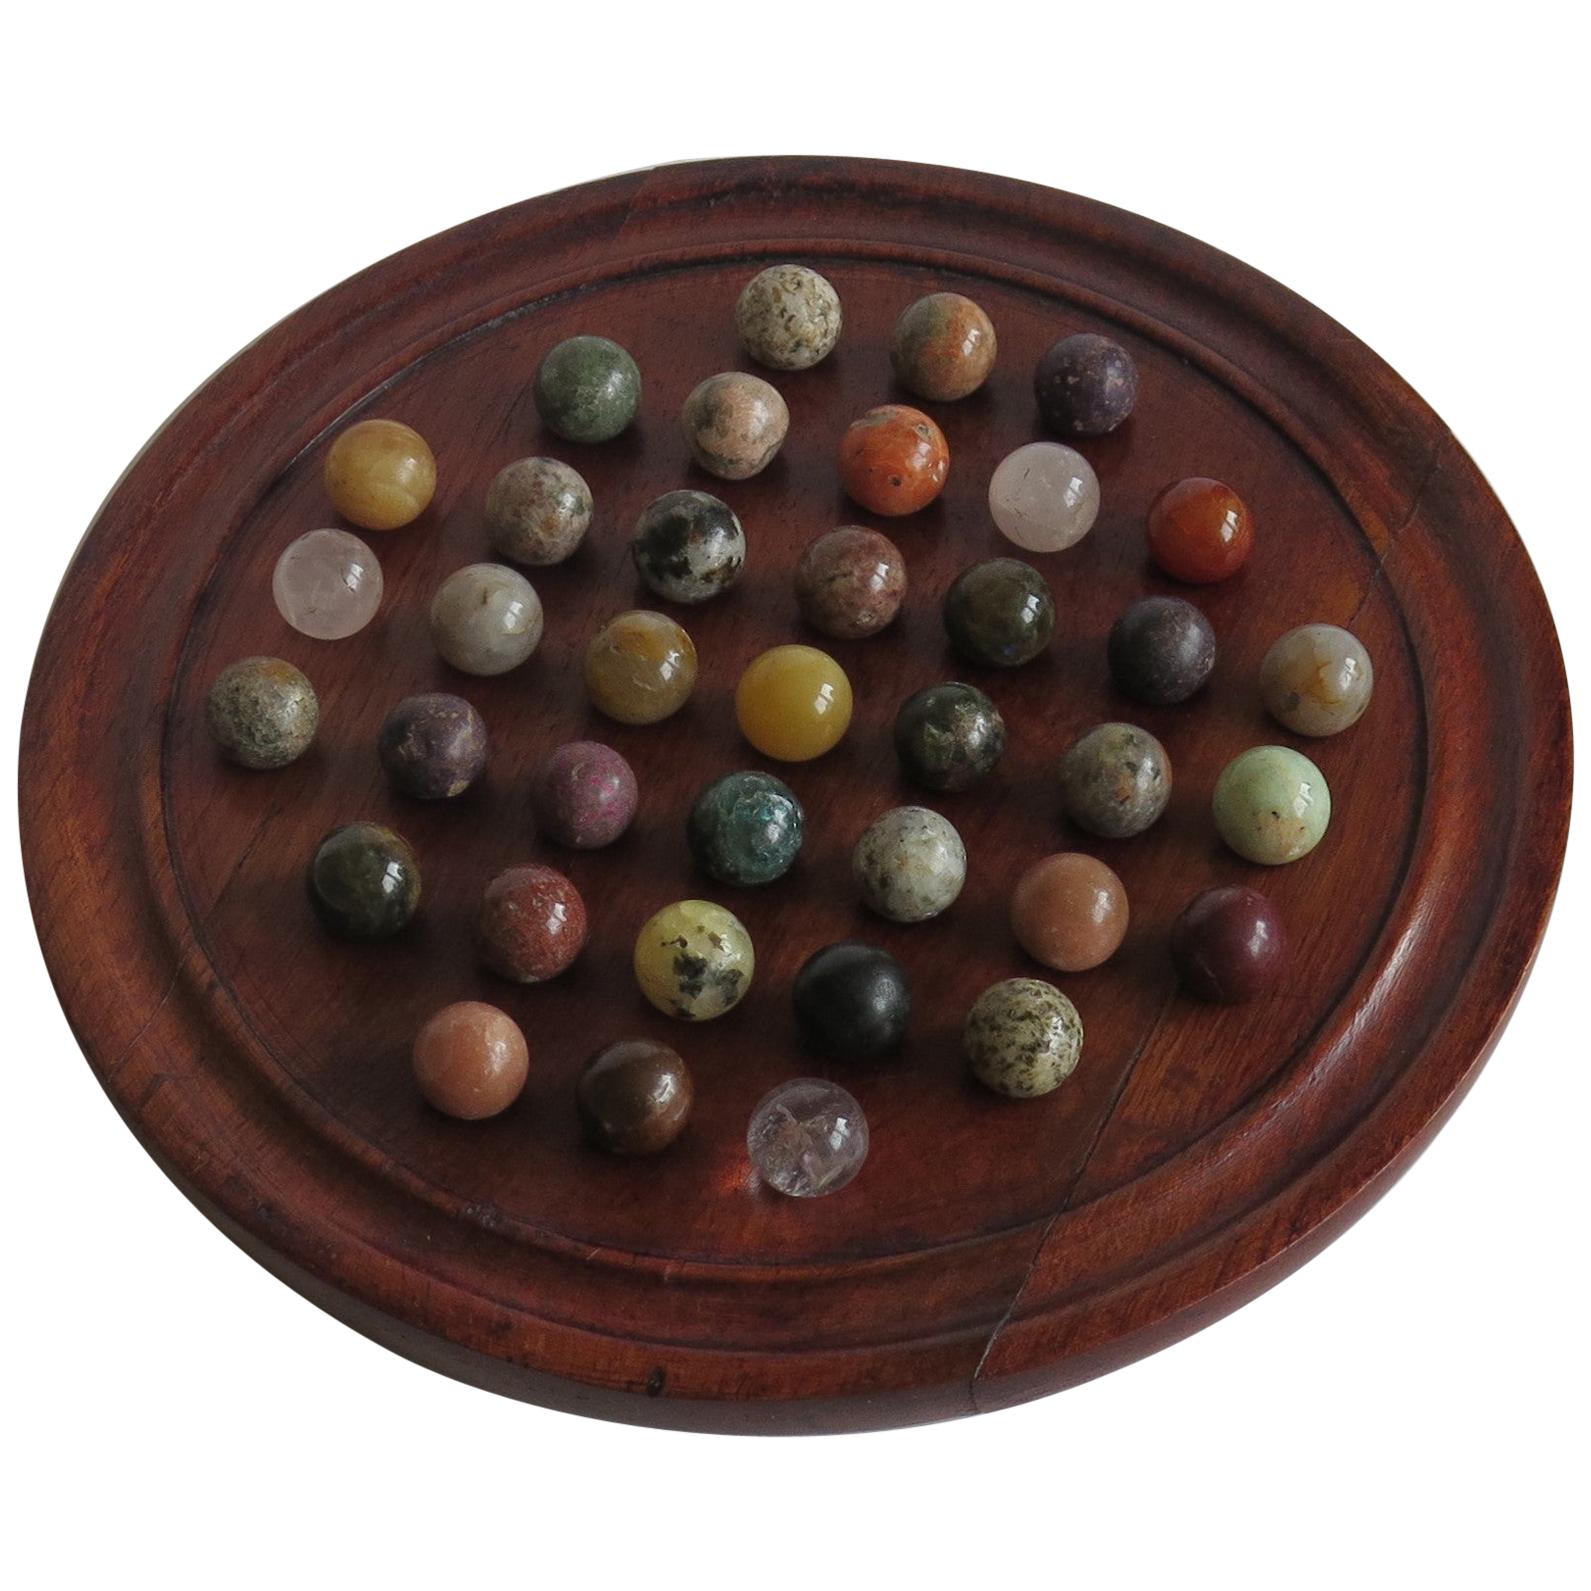 Marble Solitaire Game Hardwood Board 37 Agate Mineral Stone Marbles, circa 1915